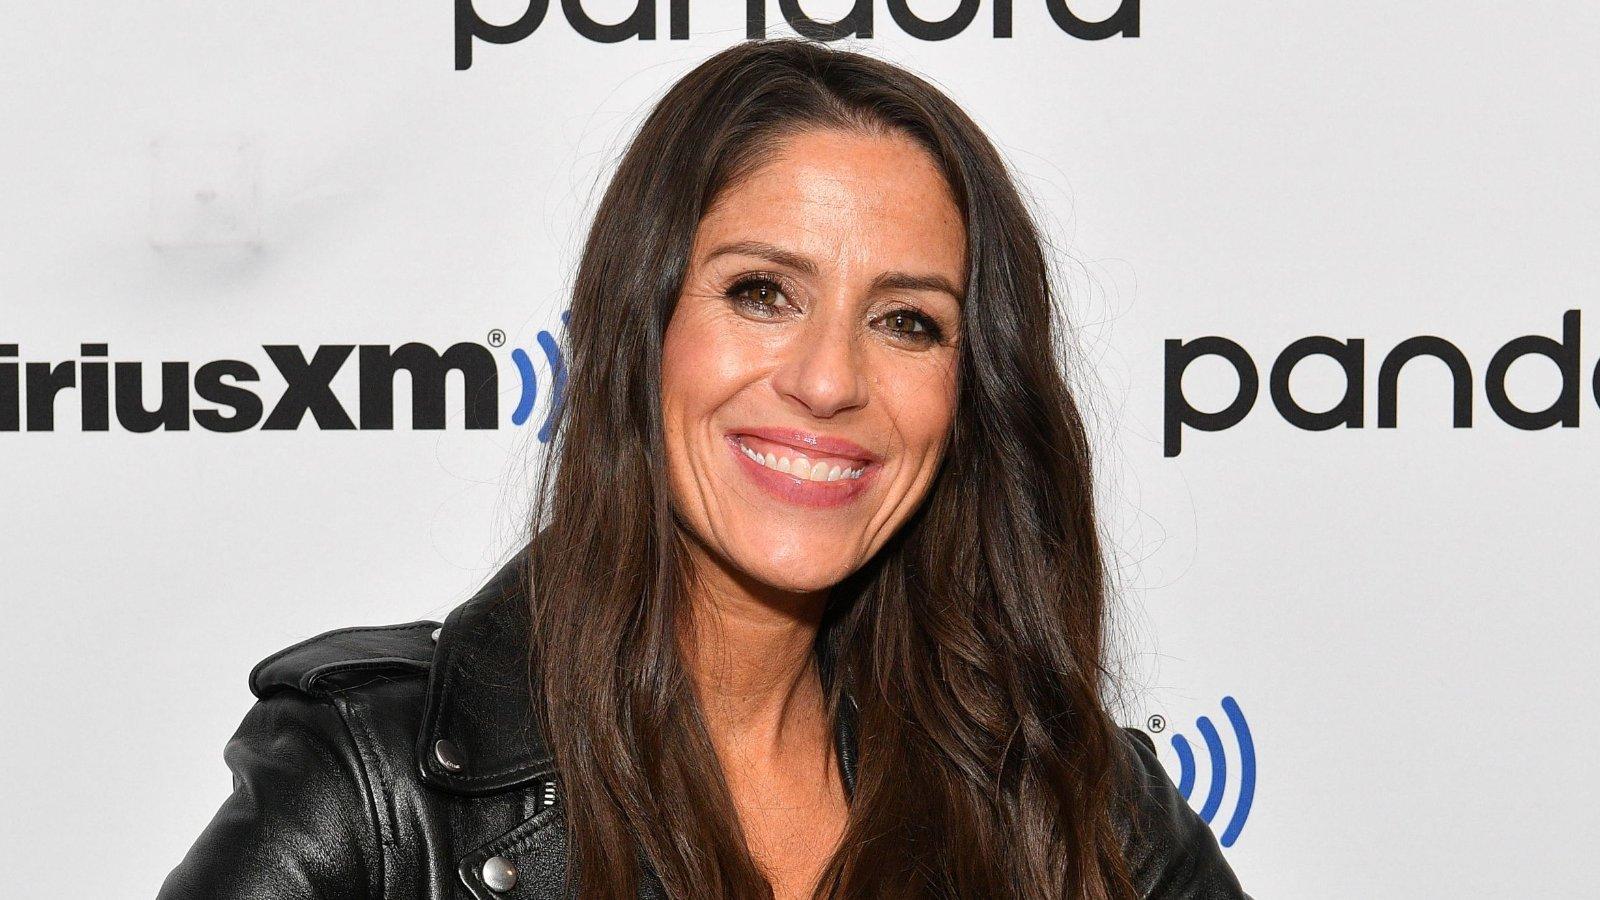 Soleil Moon Frye smiles on the red carpet